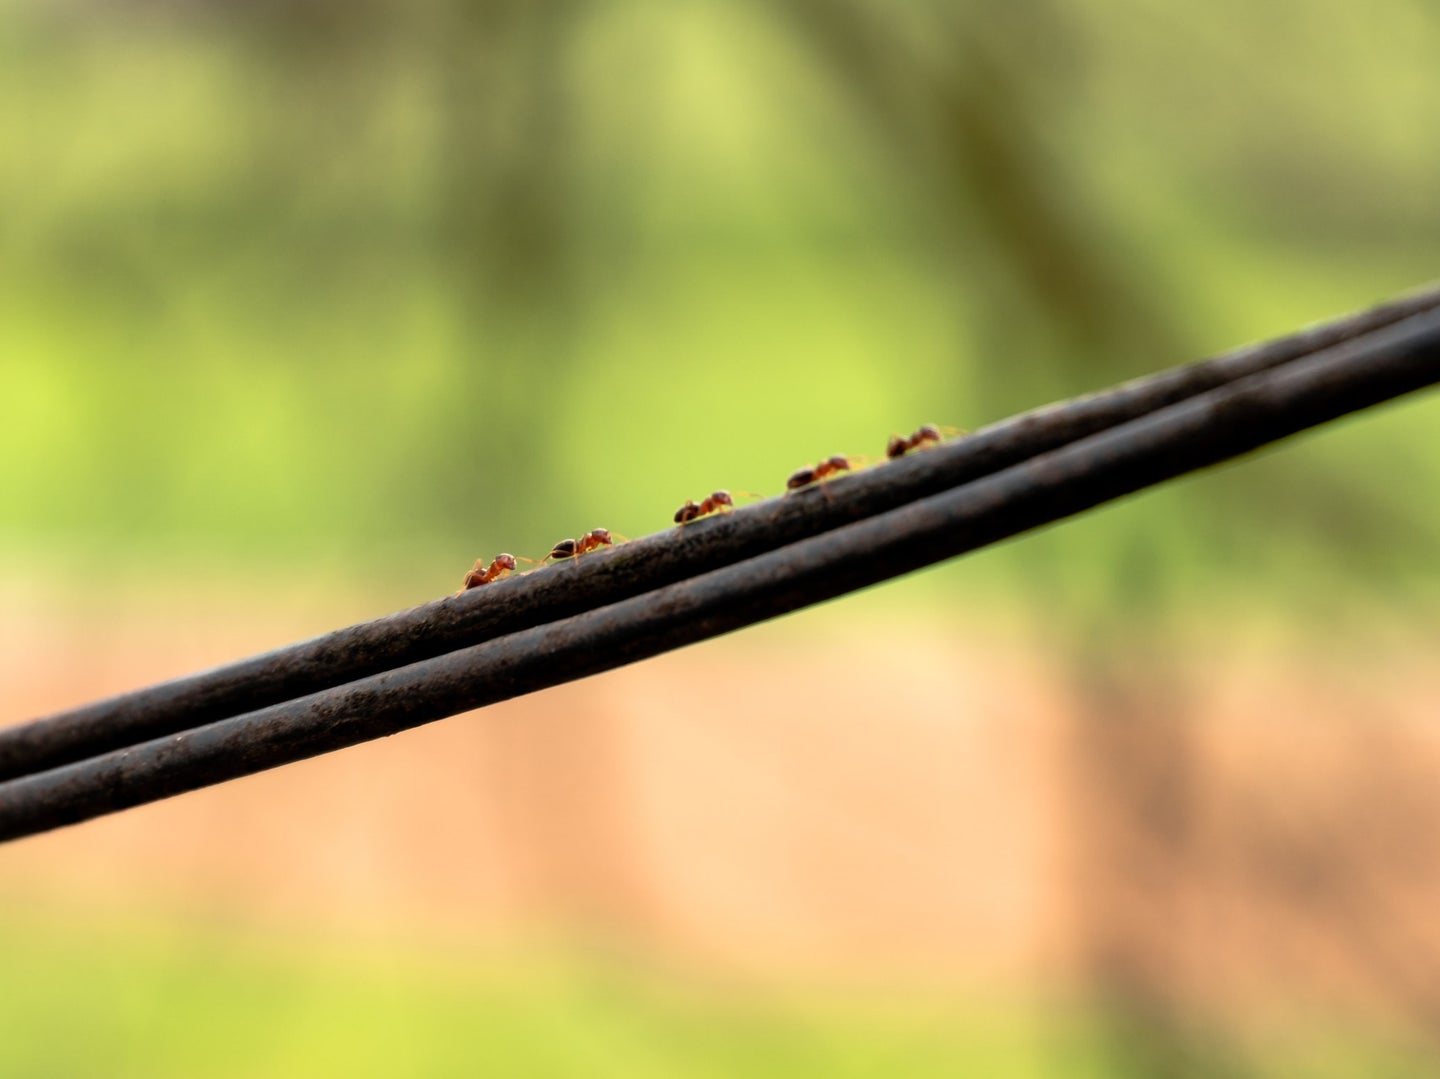 Ants climbing on an electrical wire.